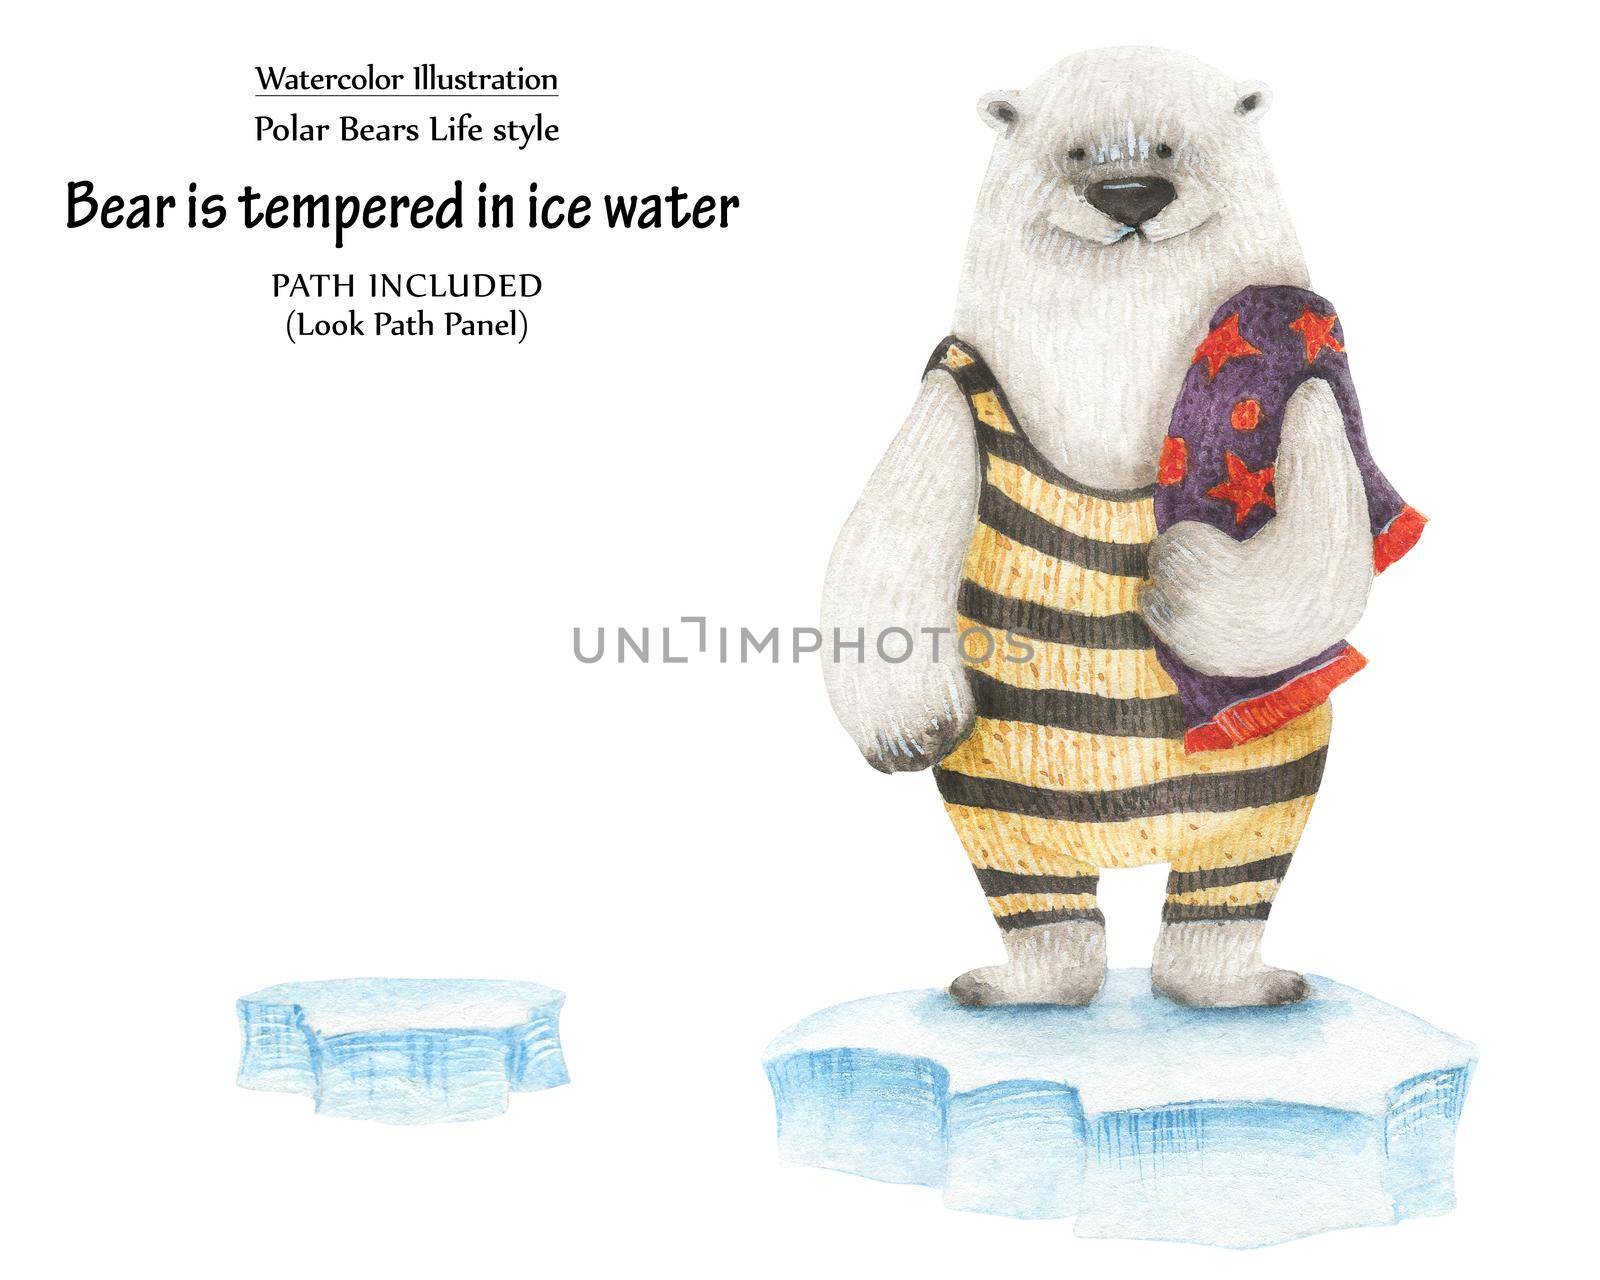 Bear swimming in ice water, close-up illustration by Xeniasnowstorm